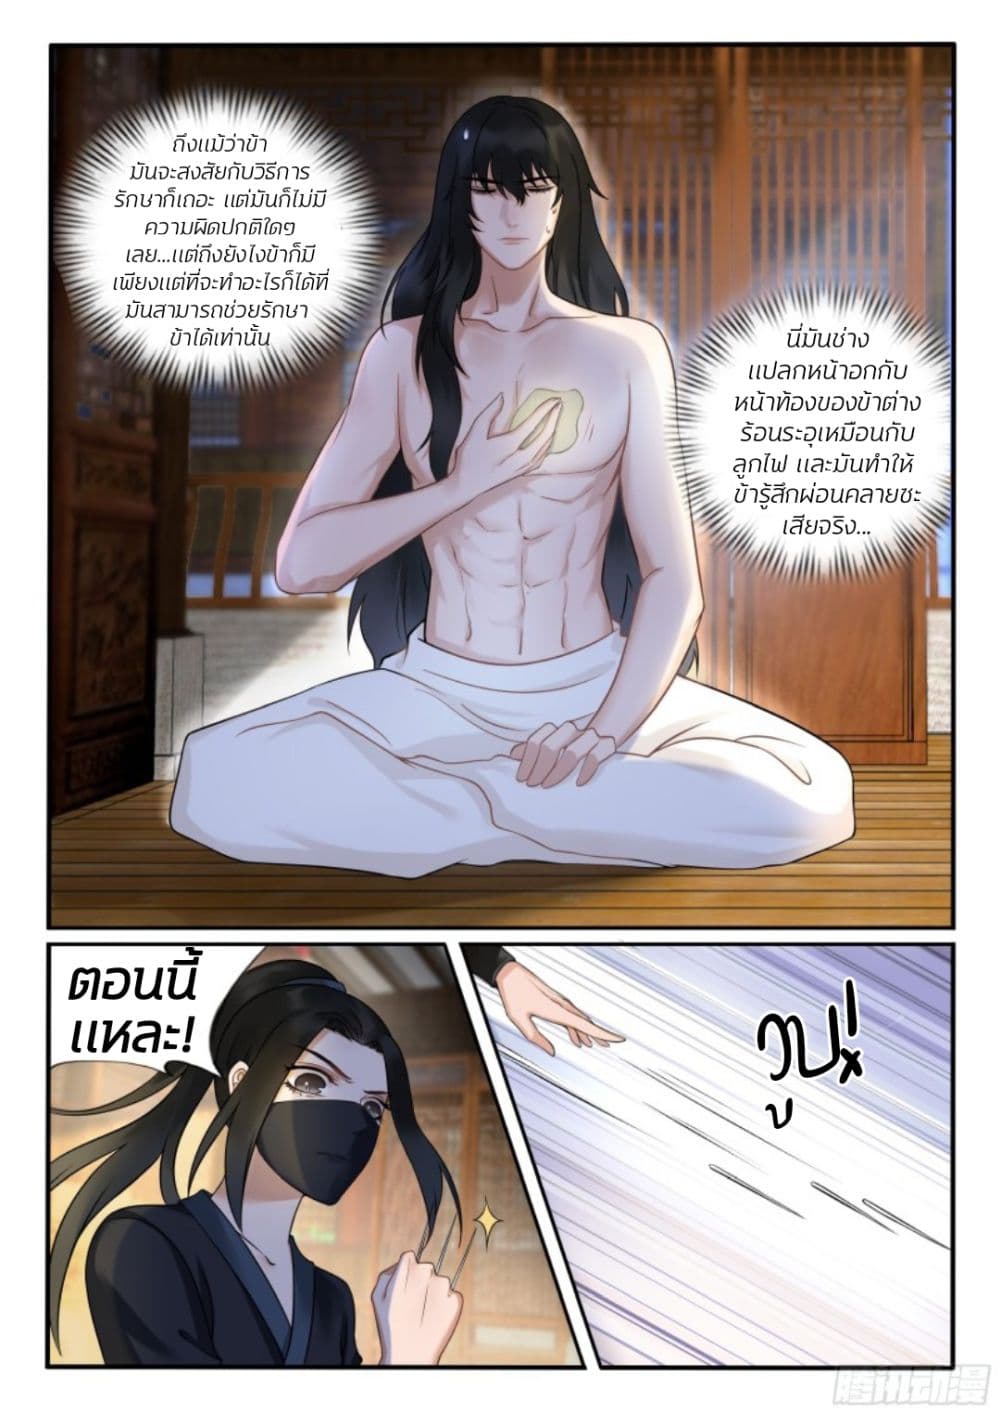 The Evil Consort Above an Evil ตอนที่ 20 (2)